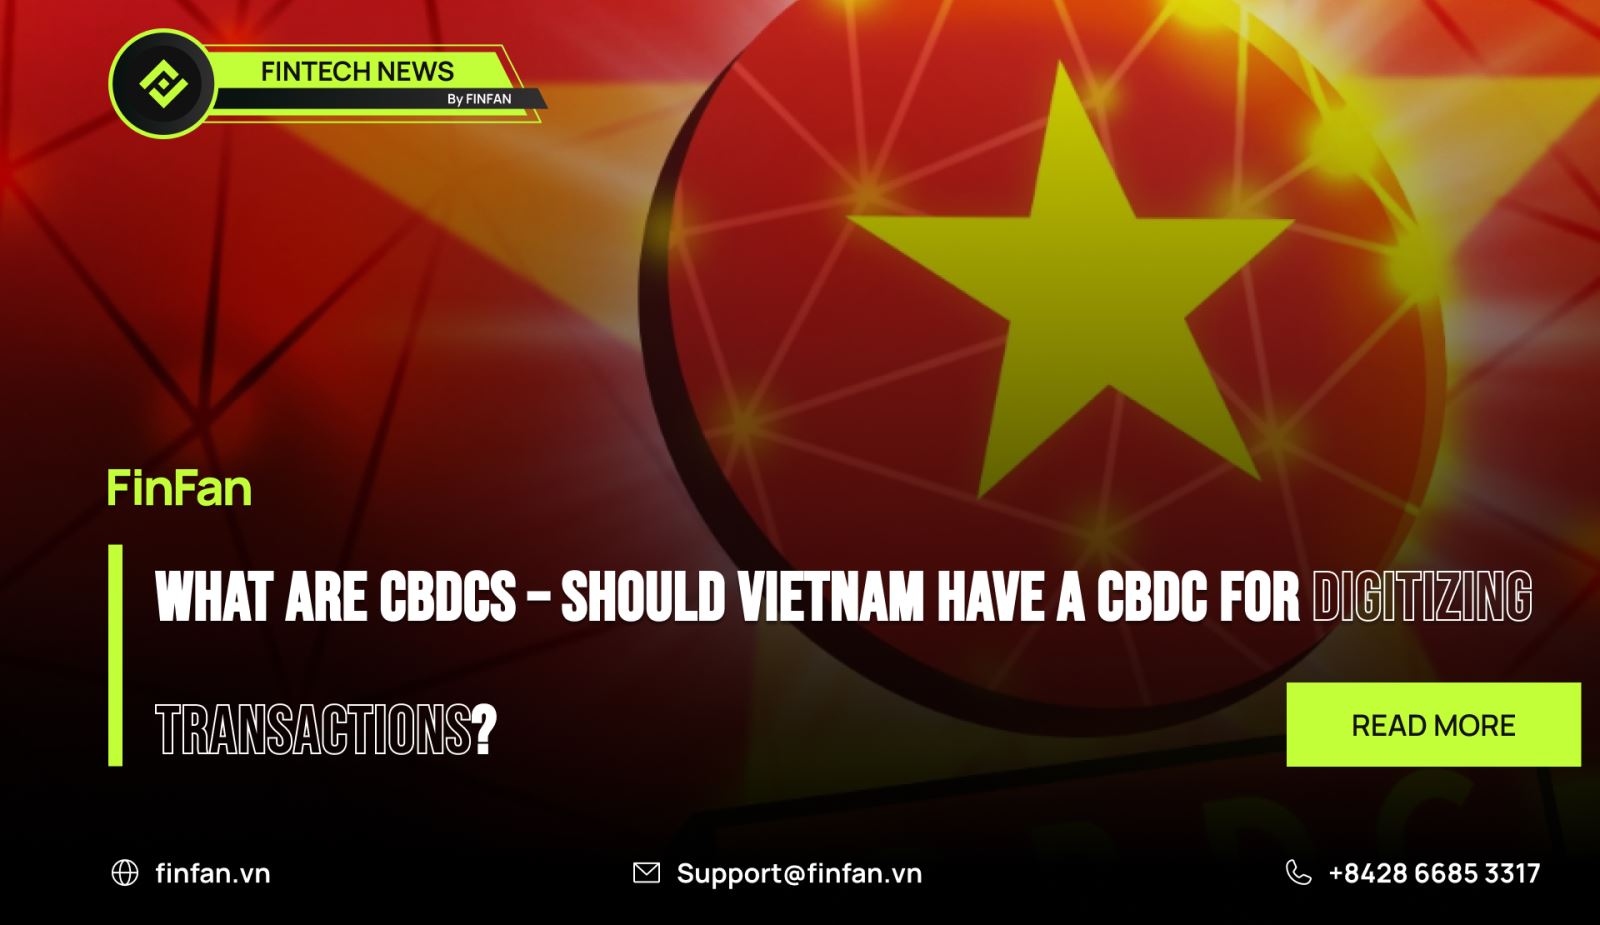 What are CBDCs – Should Vietnam have a CBDC for digitizing transactions?